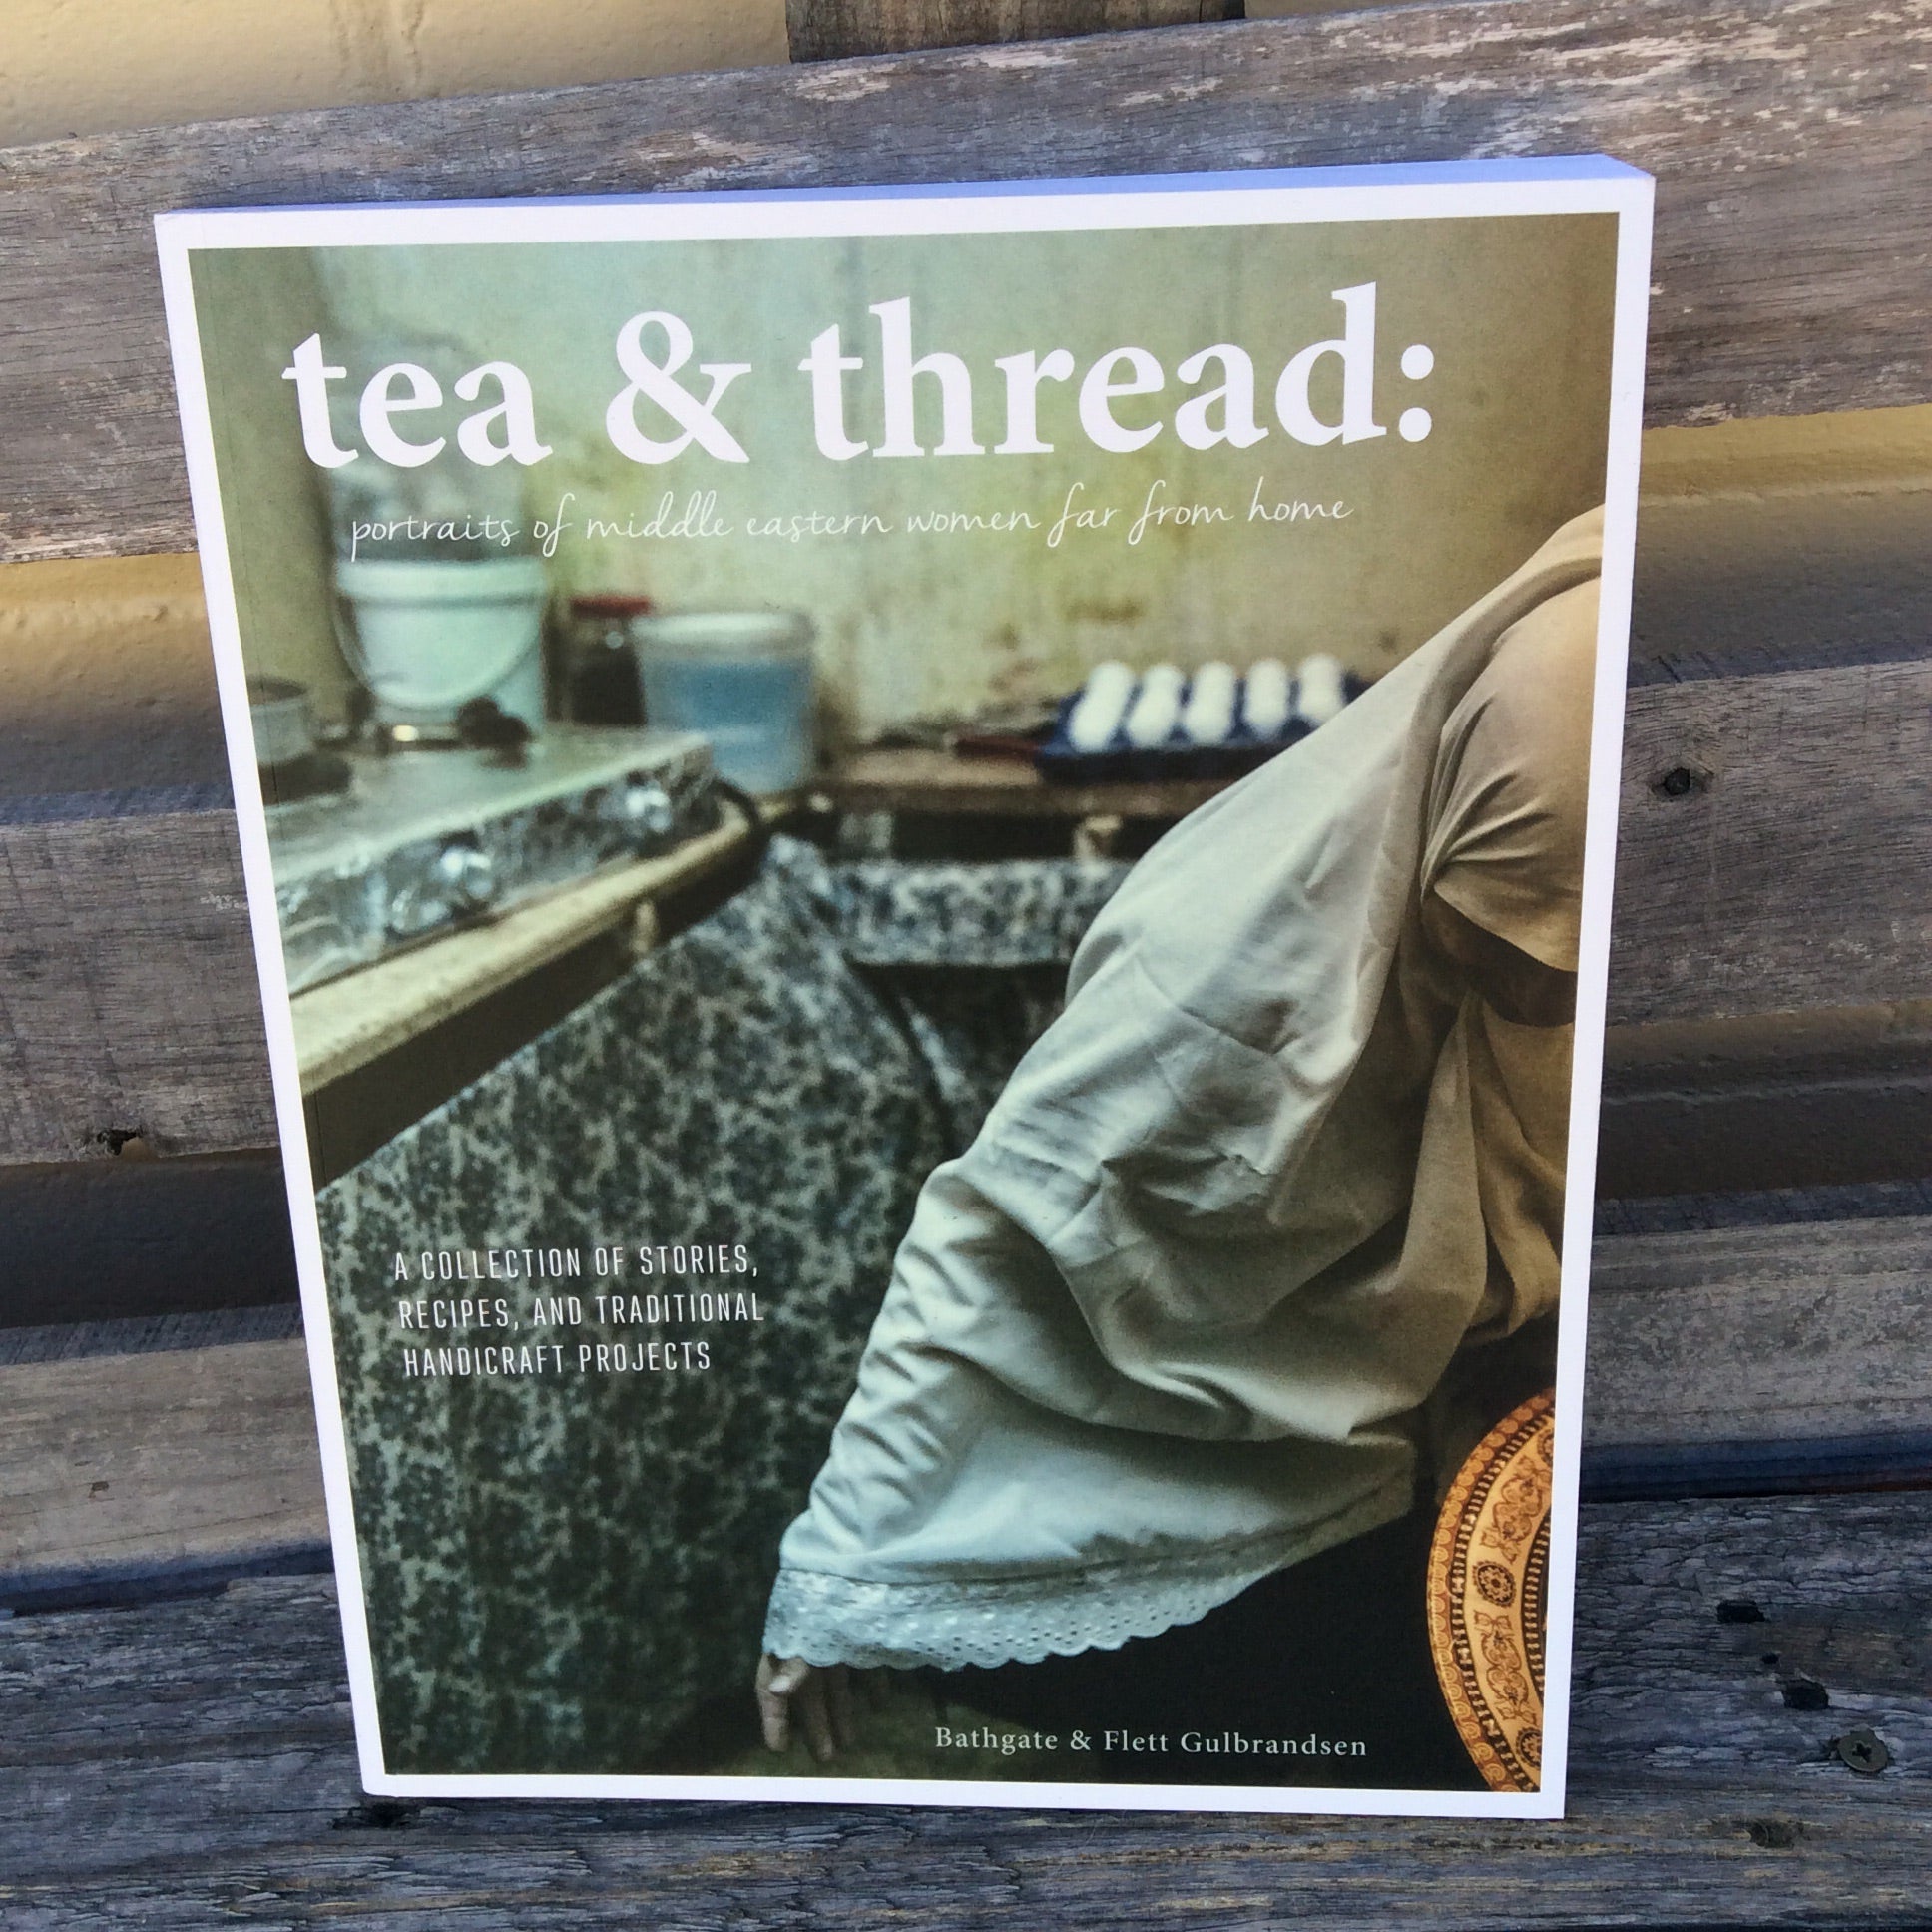 Tea & Thread. Book of portraits of middle eastern women far from home